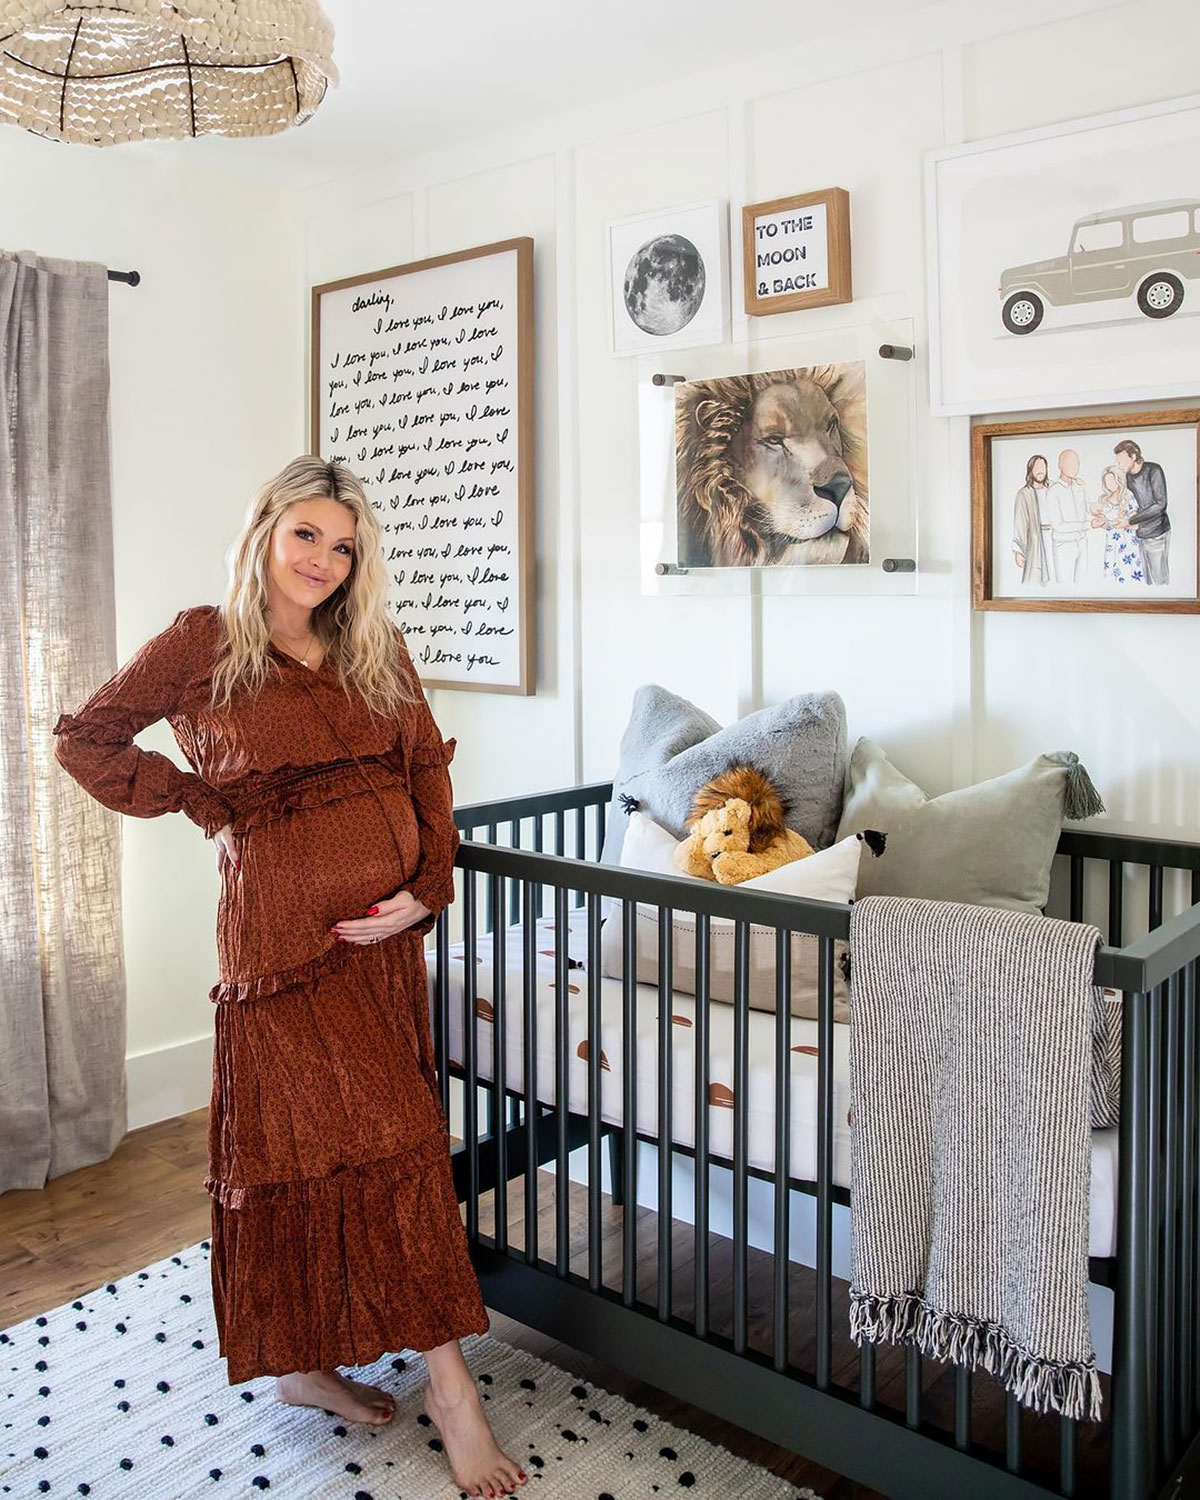 Dancing With the Stars’ Pregnant Witney Carson Shows Son’s ‘Beautiful’ Nursery: Pics